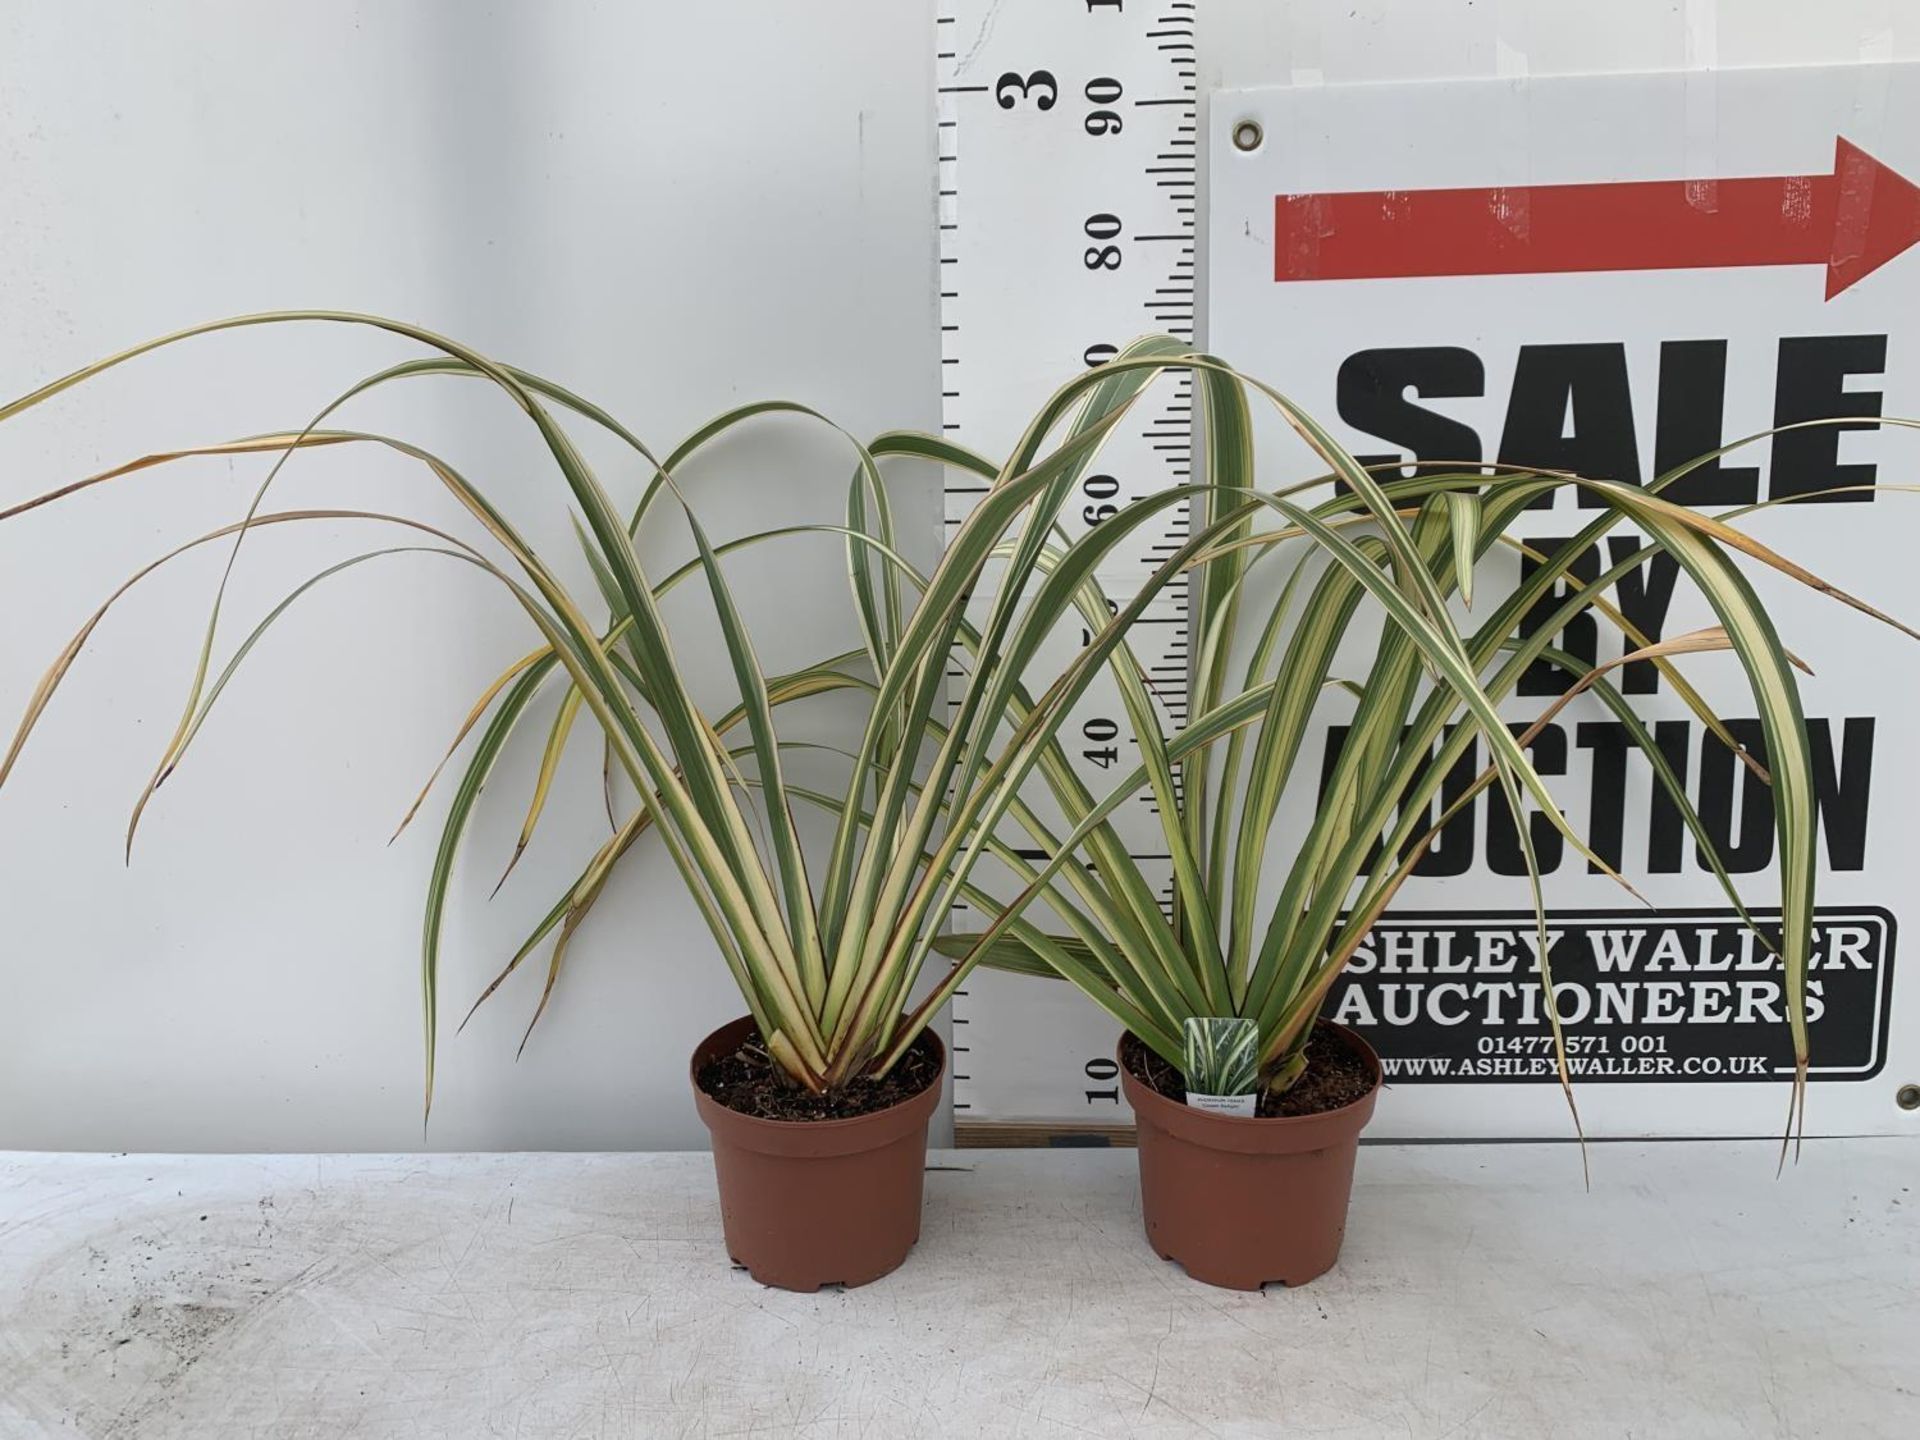 TWO GREEN PHORMIUM TENAX 'CREAM DELIGHT' APPROX 70CM IN HEIGHT IN 3 LTR POTS PLUS VAT TO BE SOLD FOR